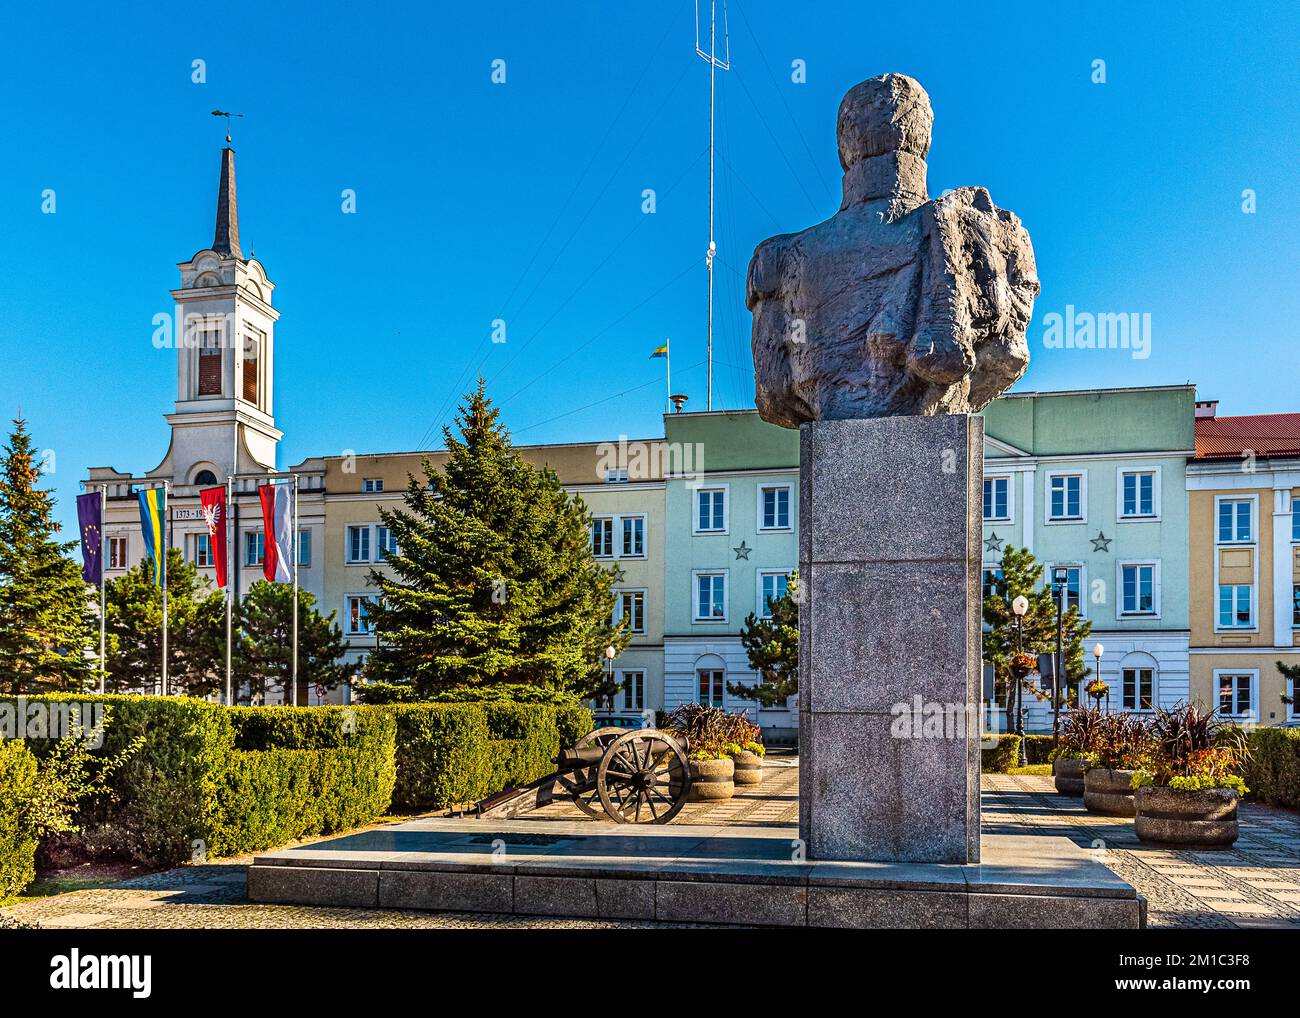 Poland. Plac named after Józef Bema in Ostrołęka. There is a statue of General Bem and the City Hall. Stock Photo